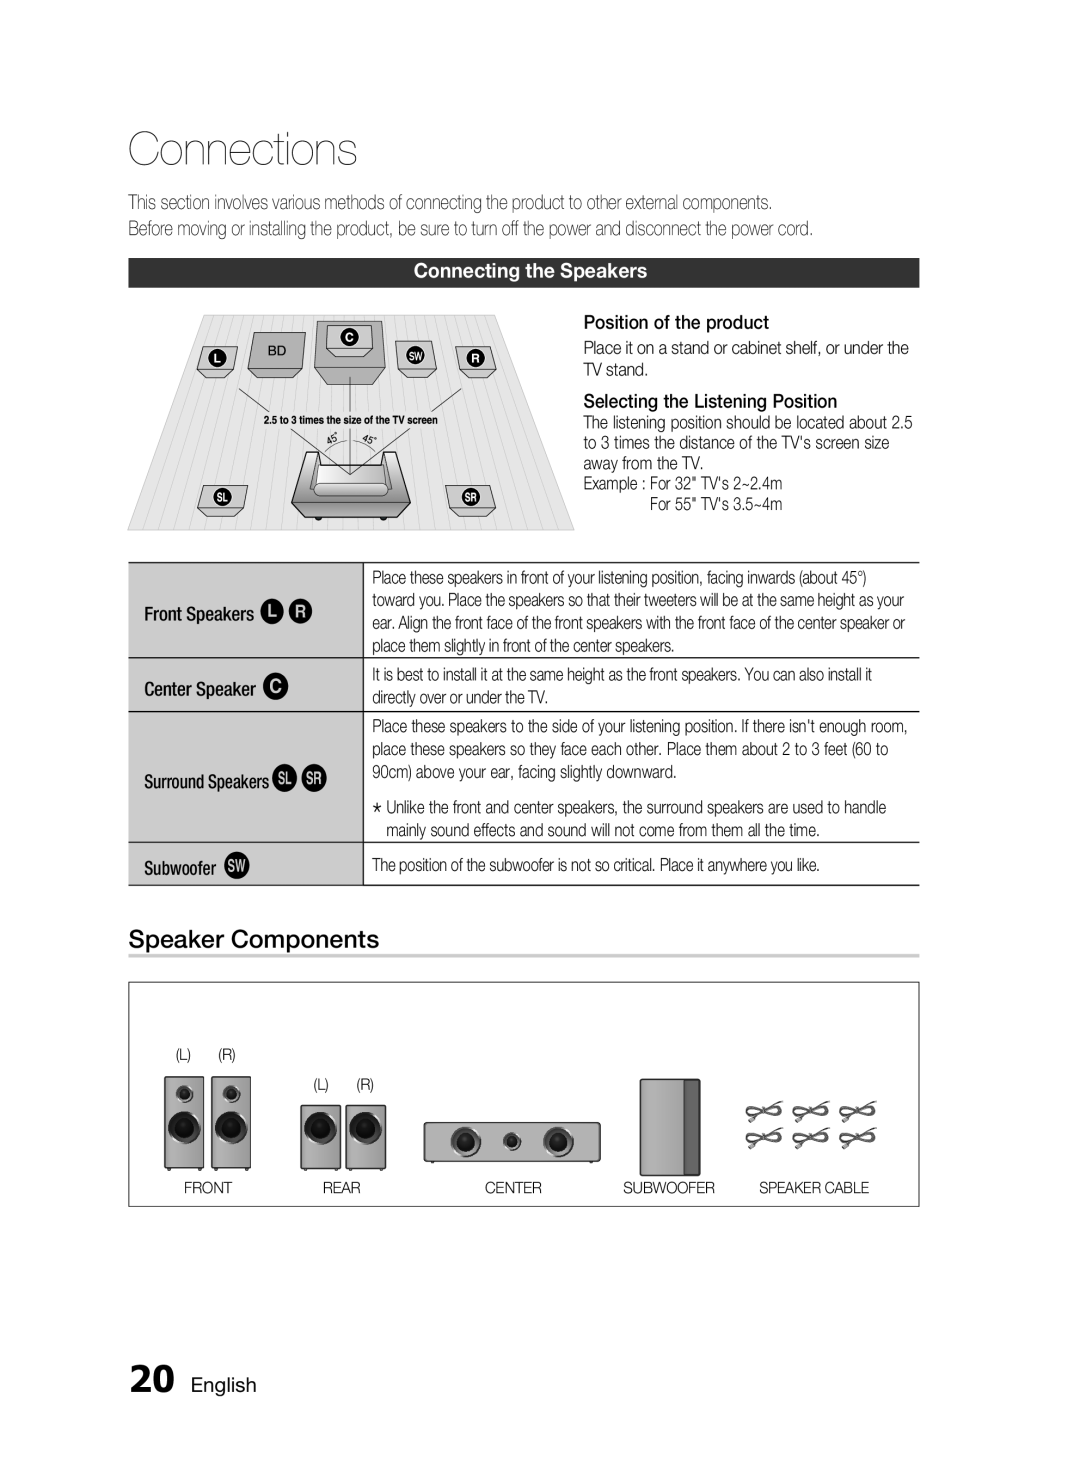 Samsung C6600 user manual Connections, Speaker Components, Connecting the Speakers, English 